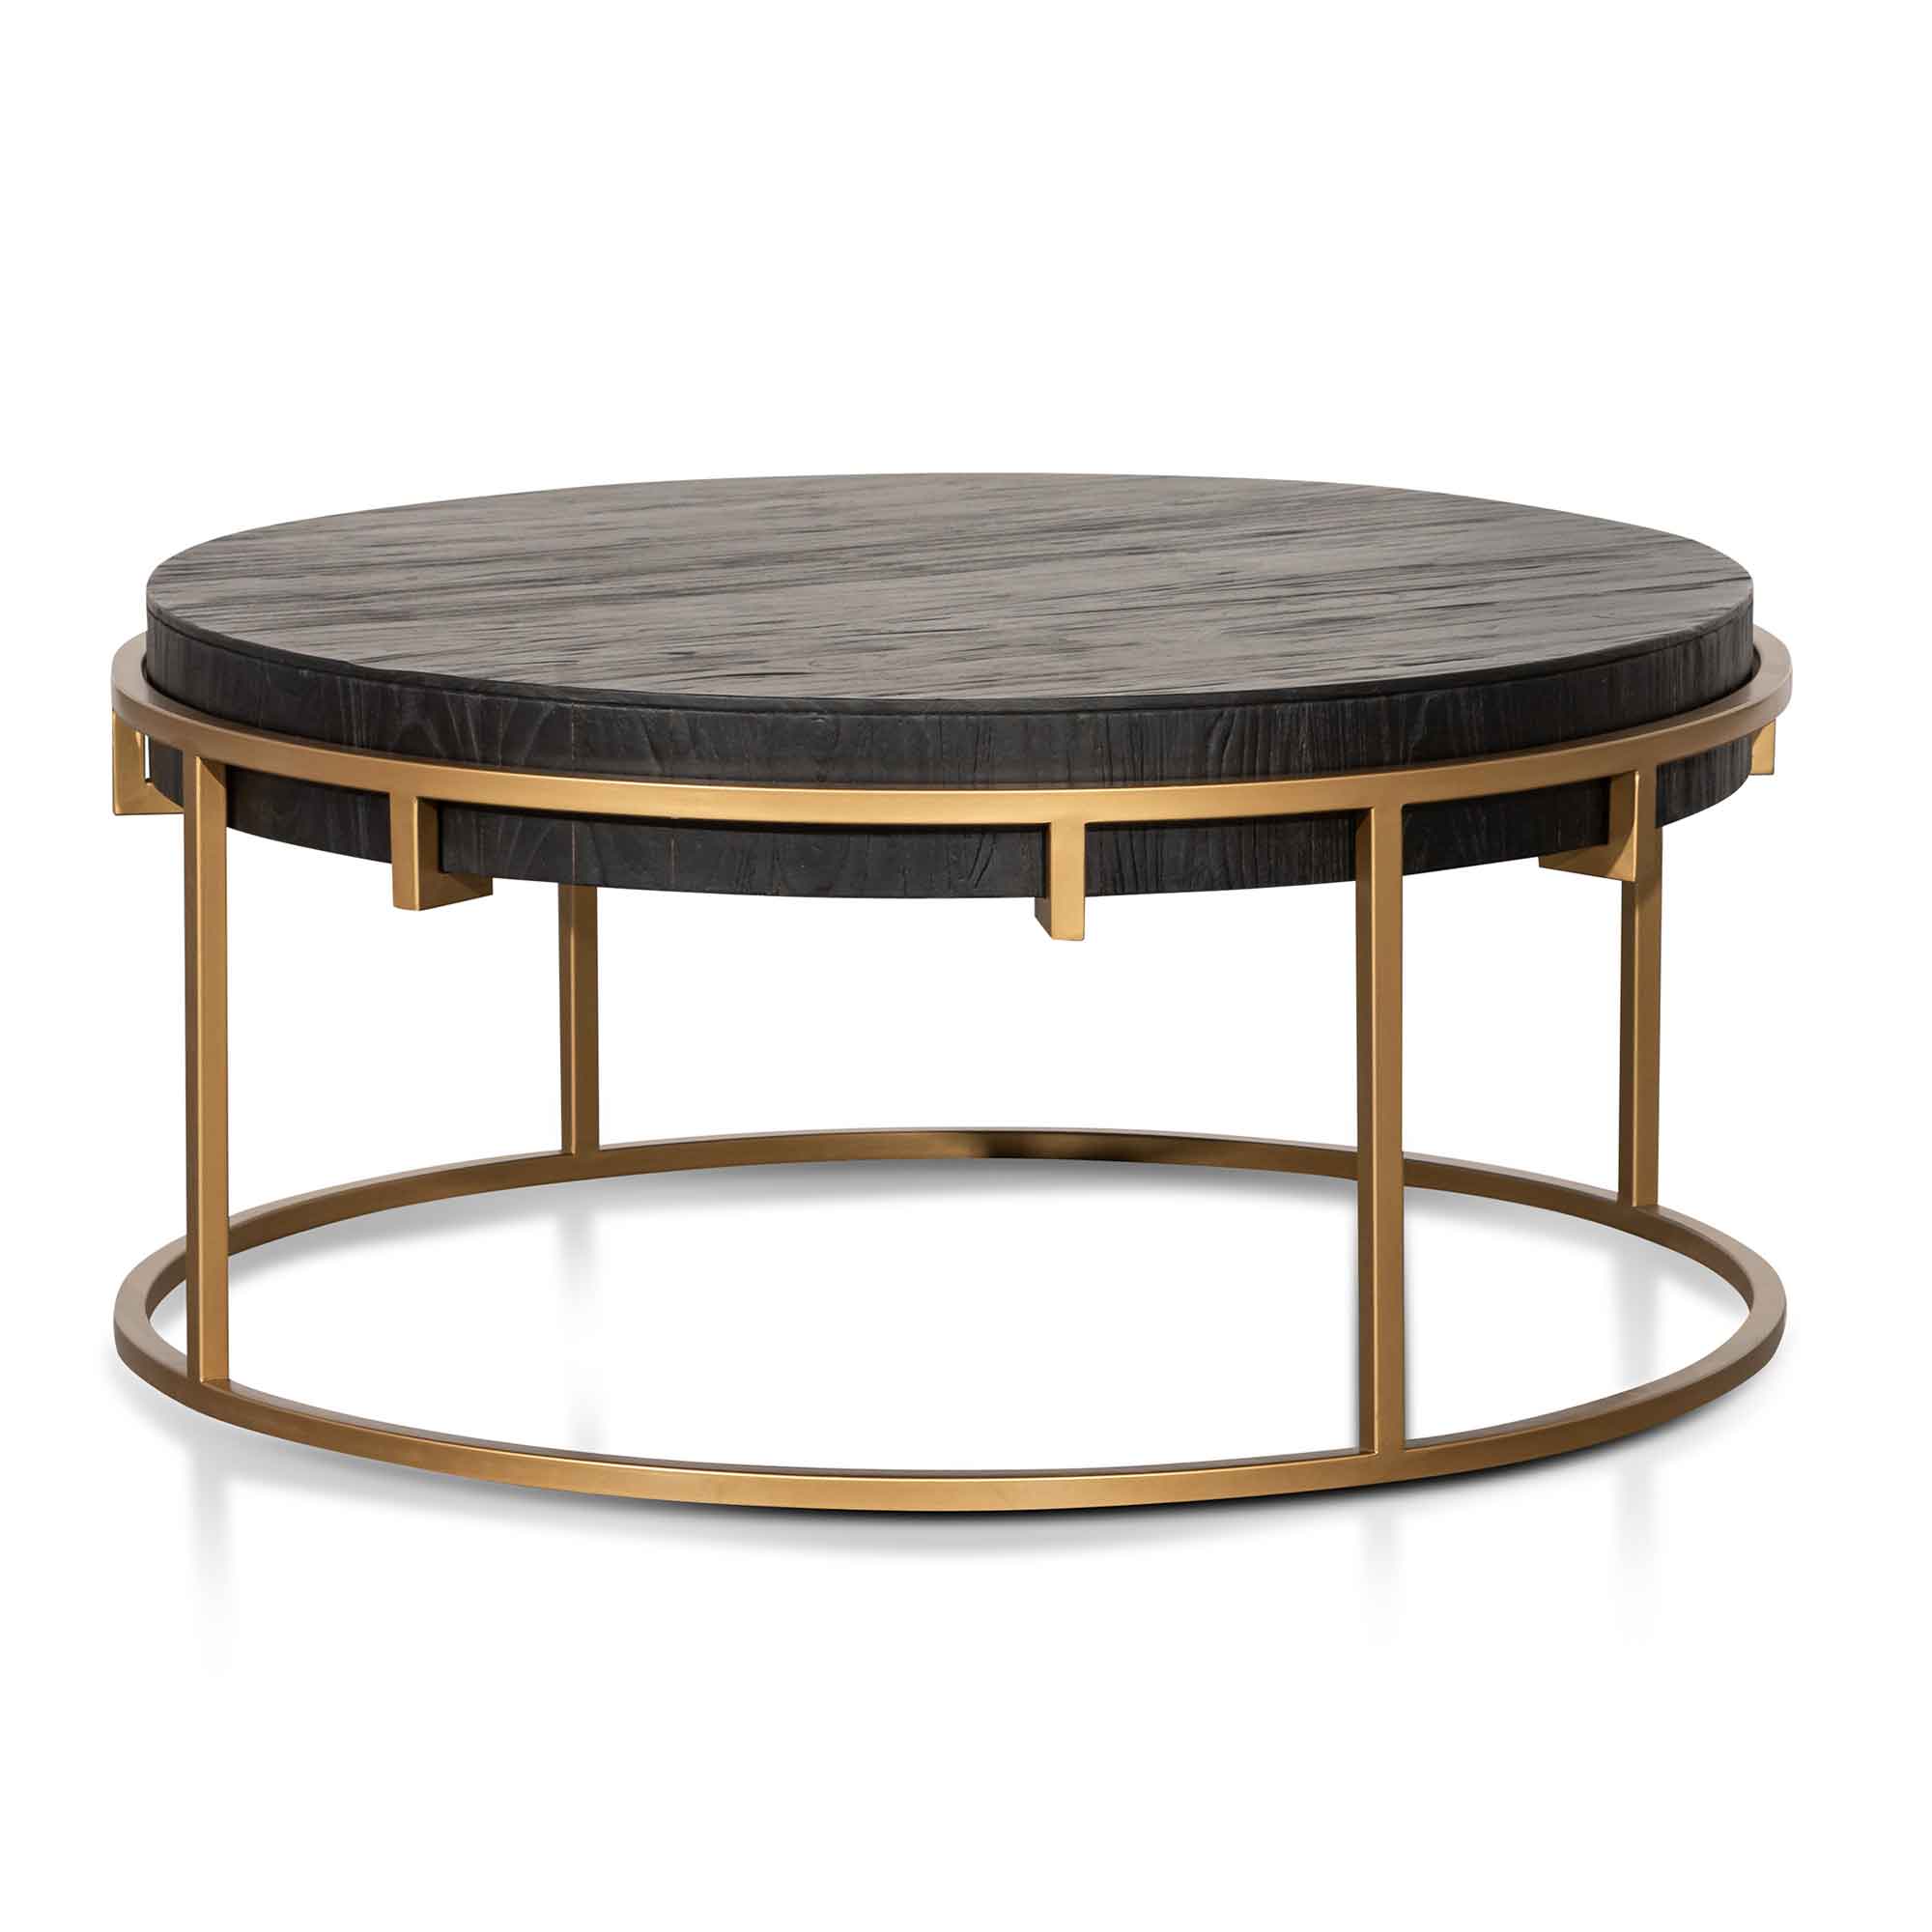 Shelley 100cm Round Coffee Table - Golden | Buy Coffee Tables - 2268254